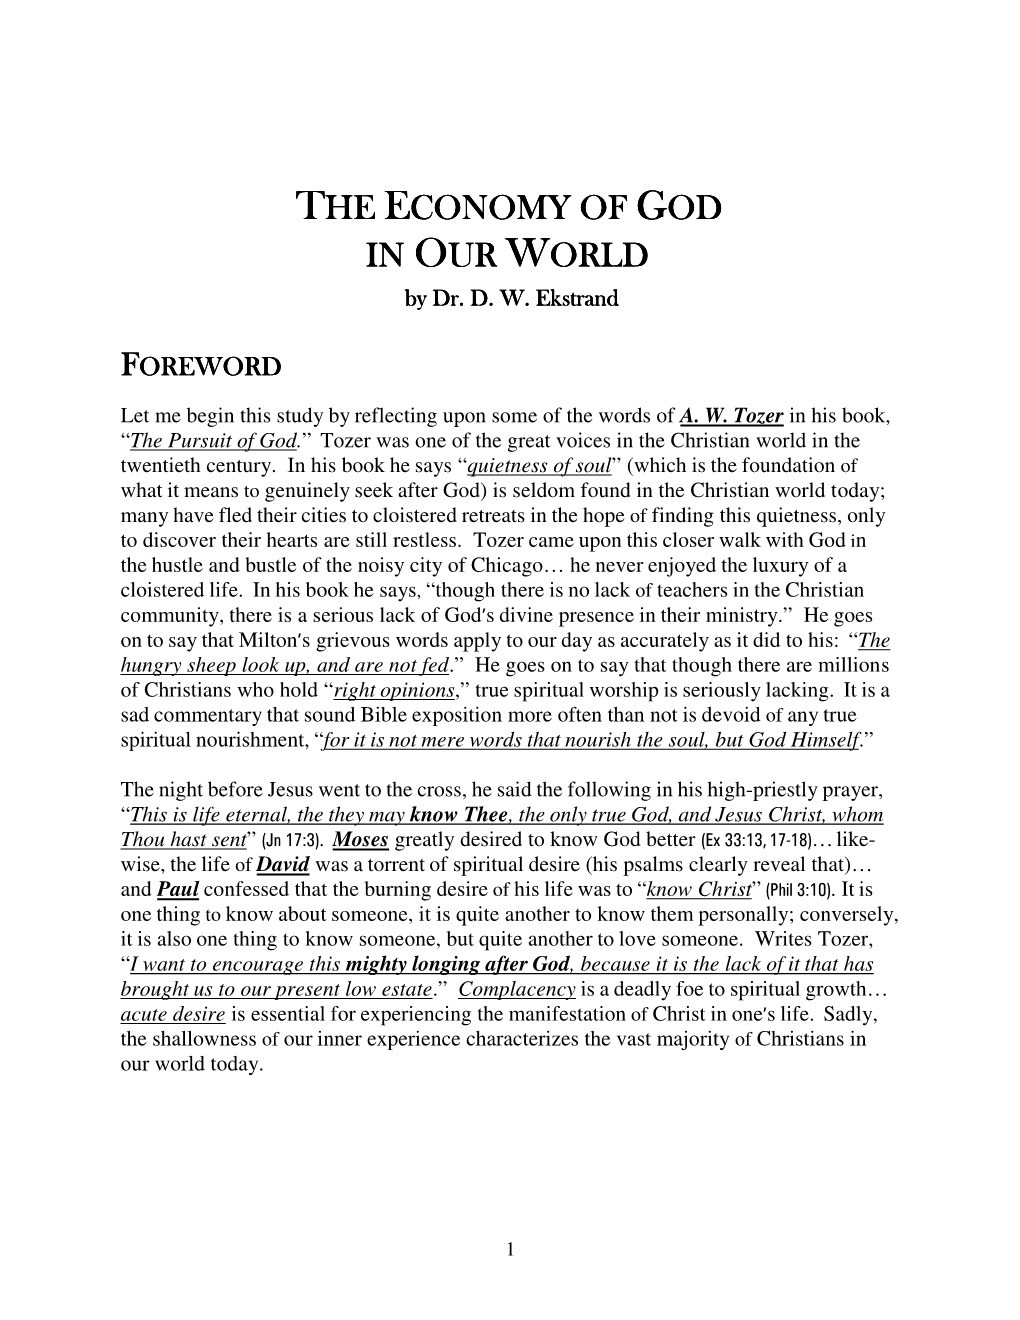 The Economy of Conomy of God in Our World